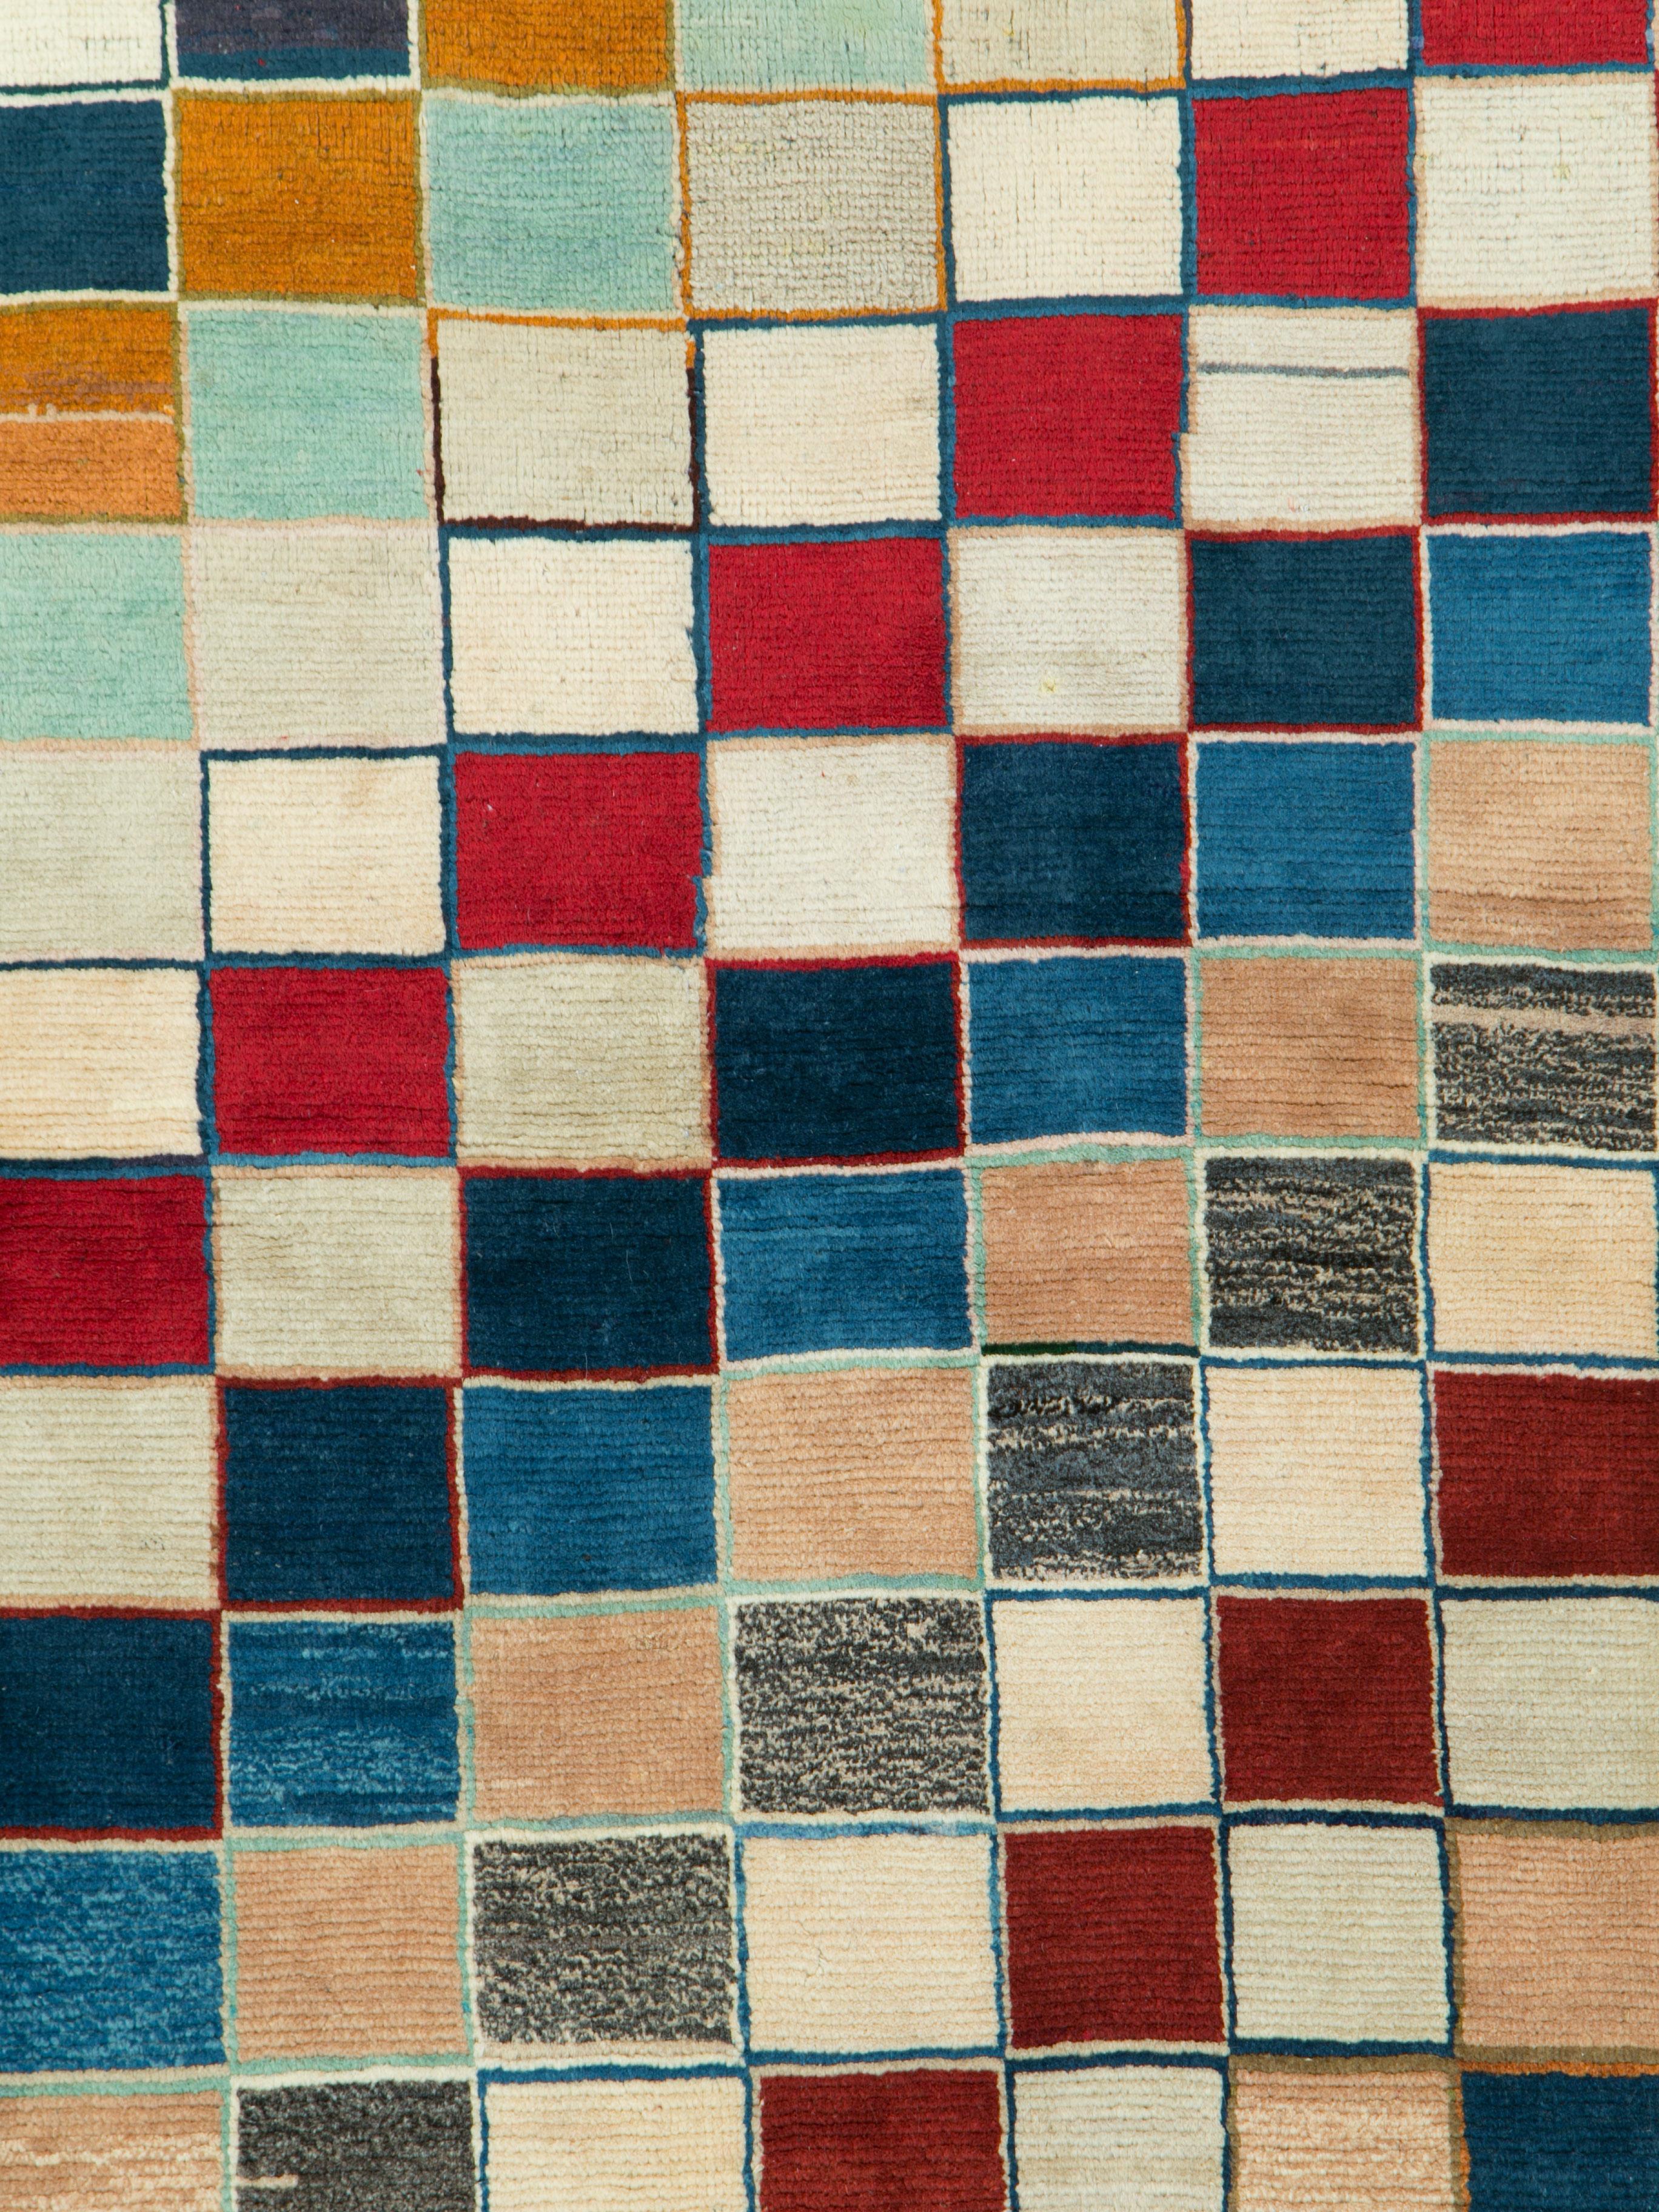 A vintage Persian Gabbeh rug from the mid-20th century with a checkerboard design utilizing a wide color palette.